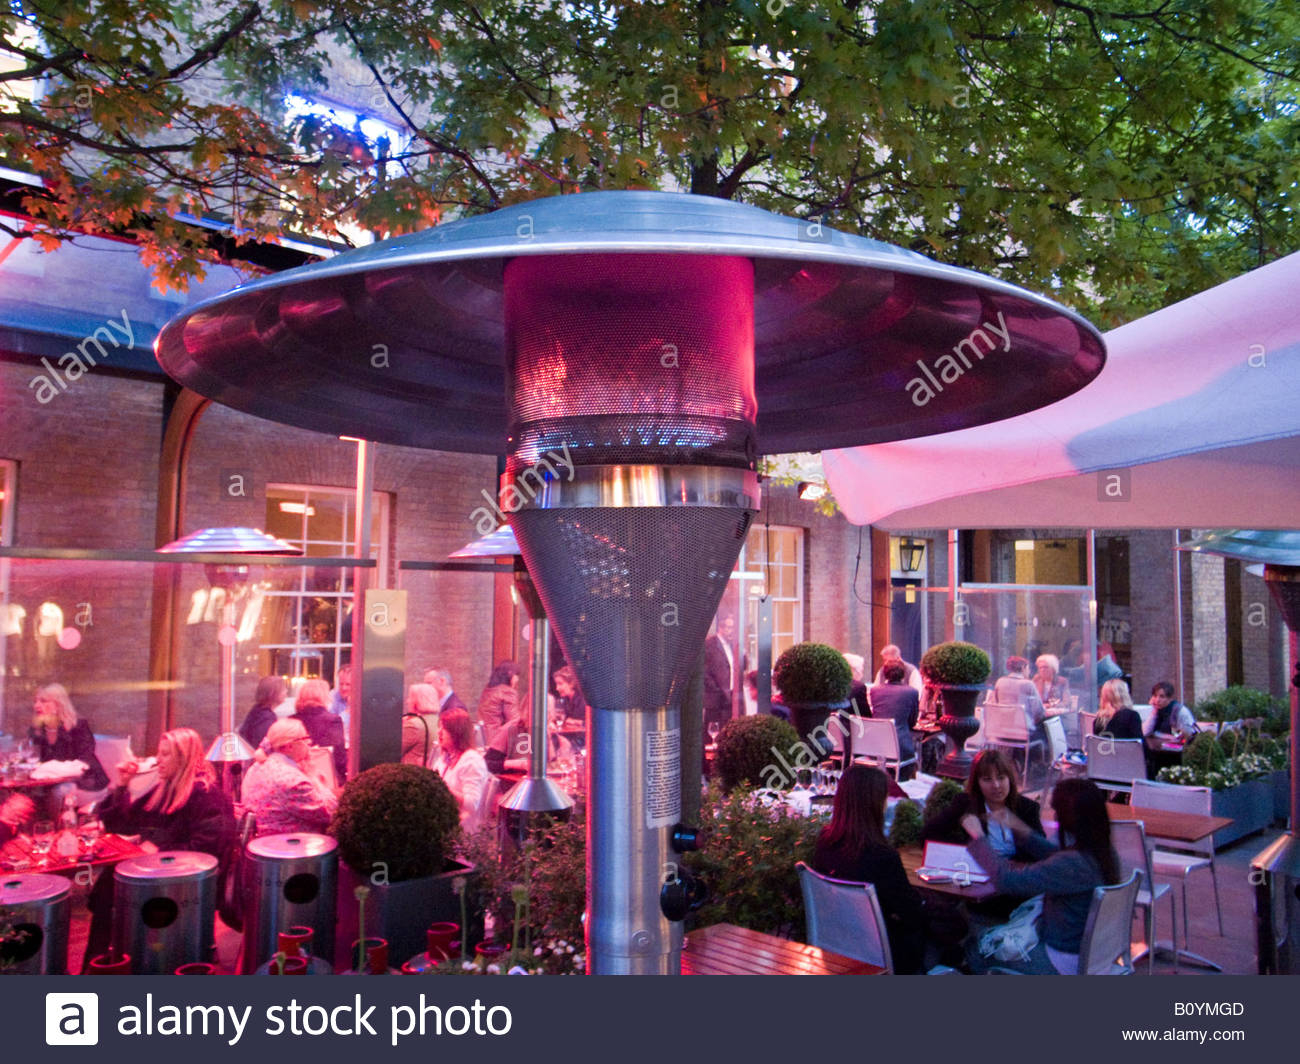 Gas Patio Heater Outside Restaurant London Uk Stock Photo in measurements 1300 X 1064